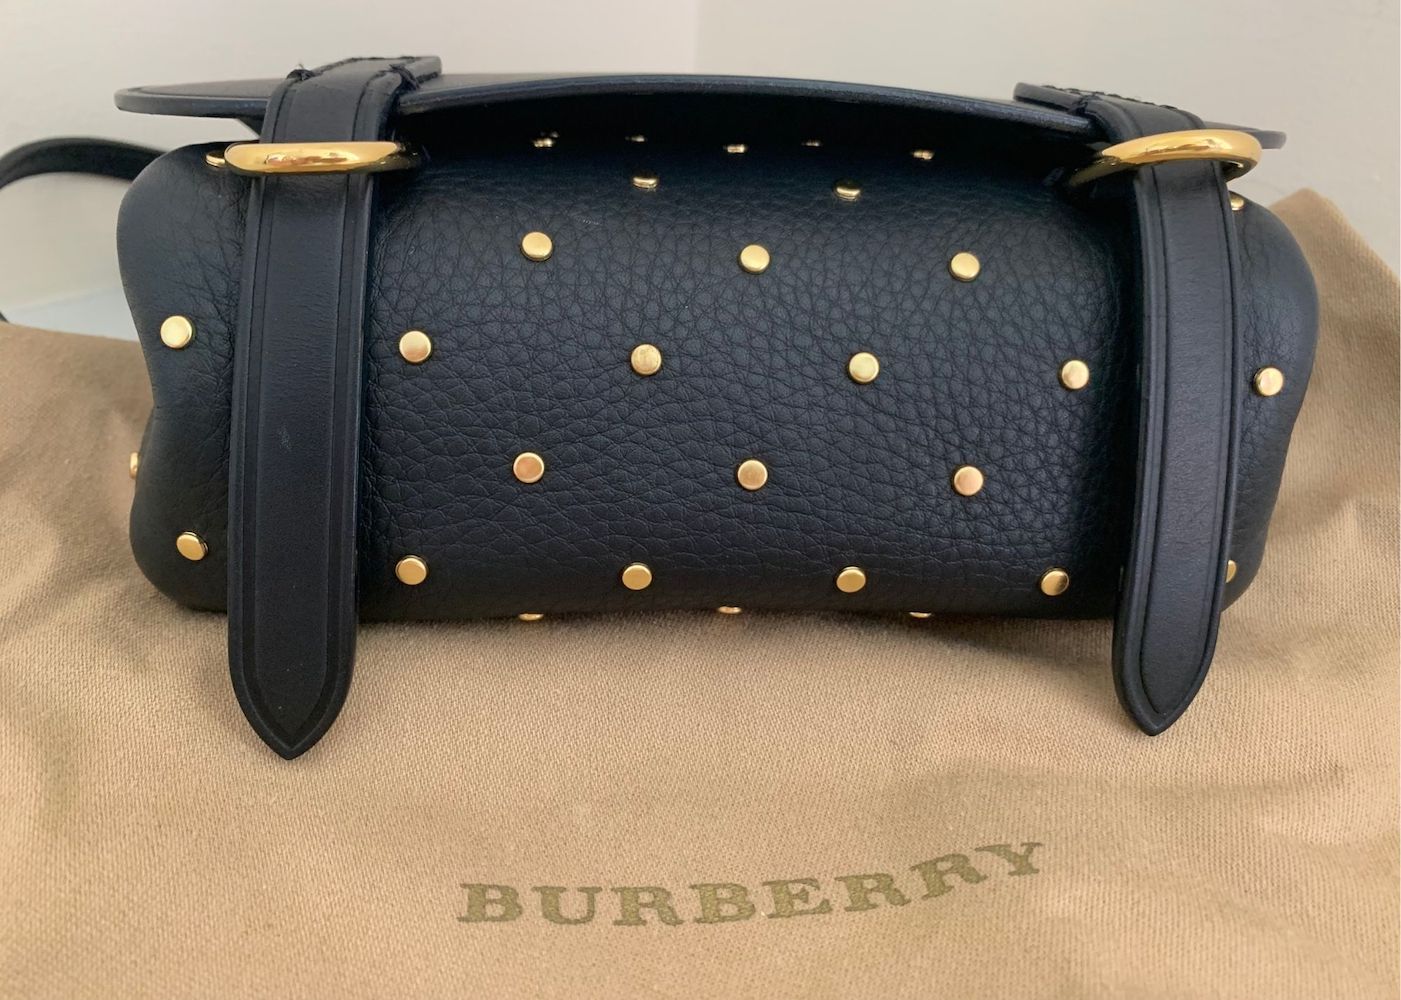 Burberry Black Leather Bridle Tote Bag